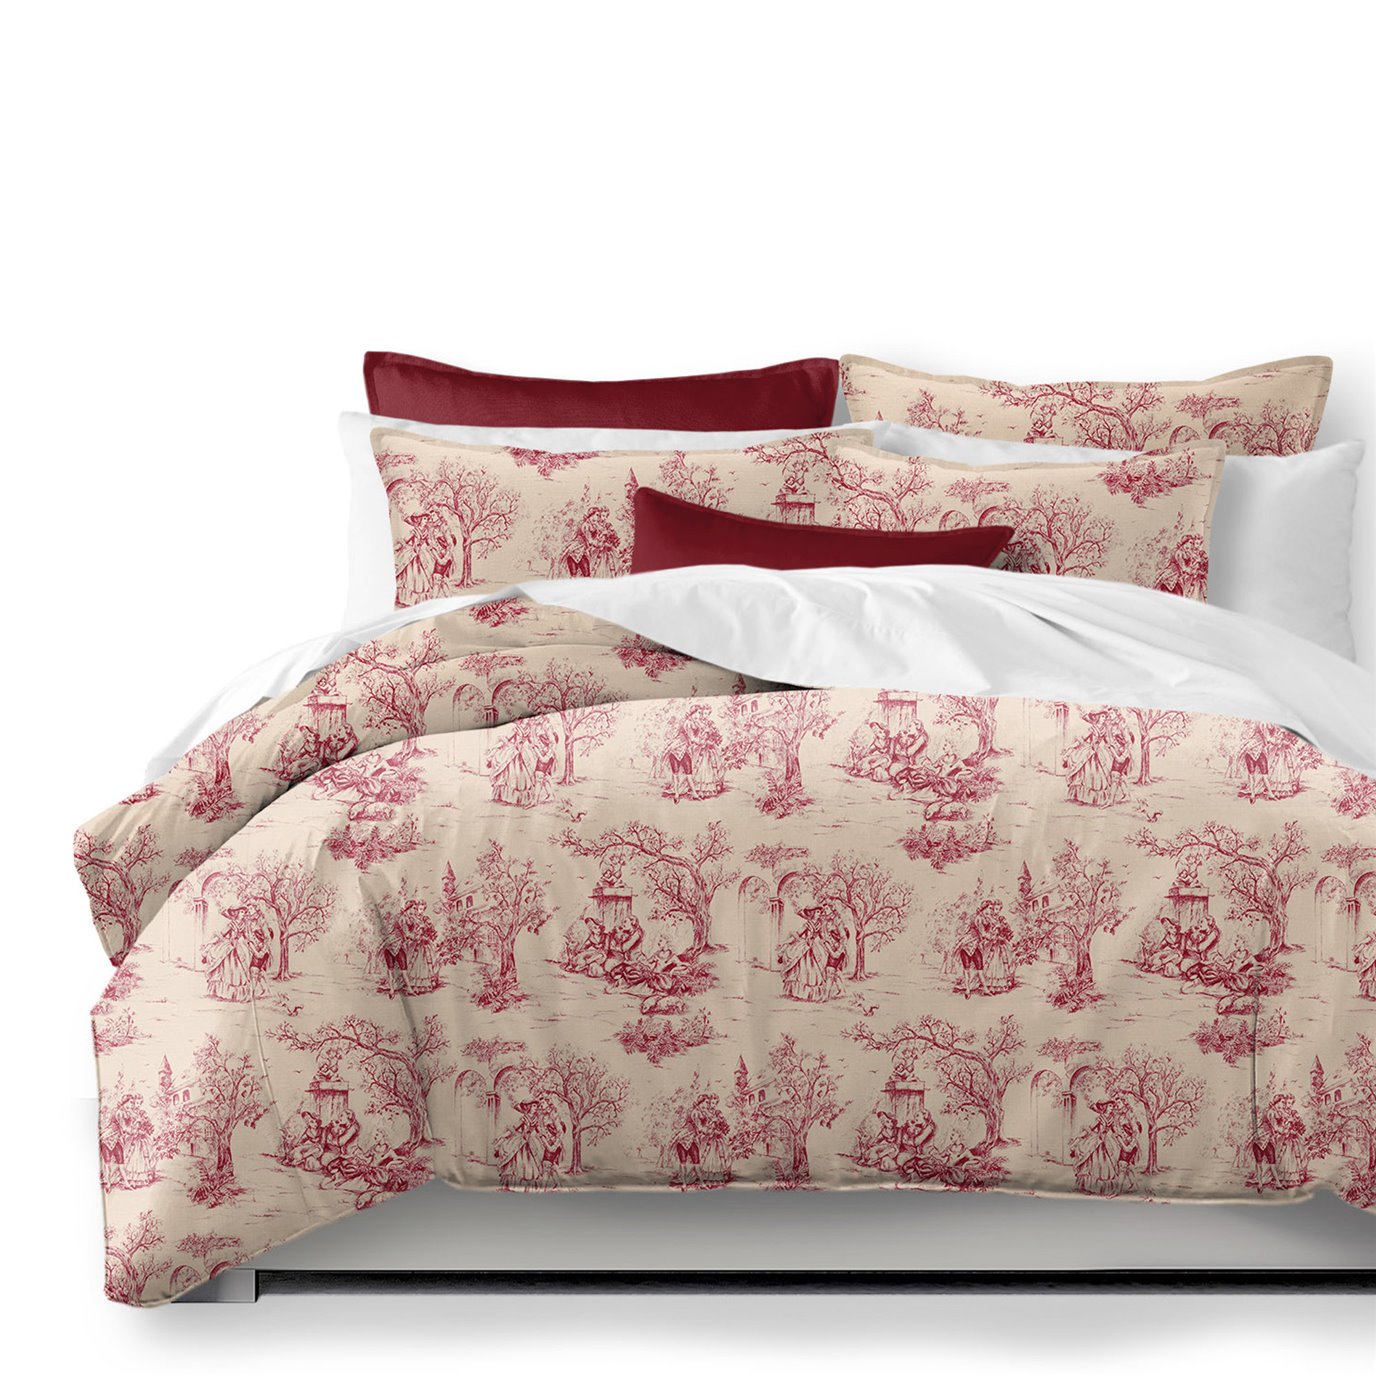 Archamps Toile Red Comforter and Pillow Sham(s) Set - Size Super King